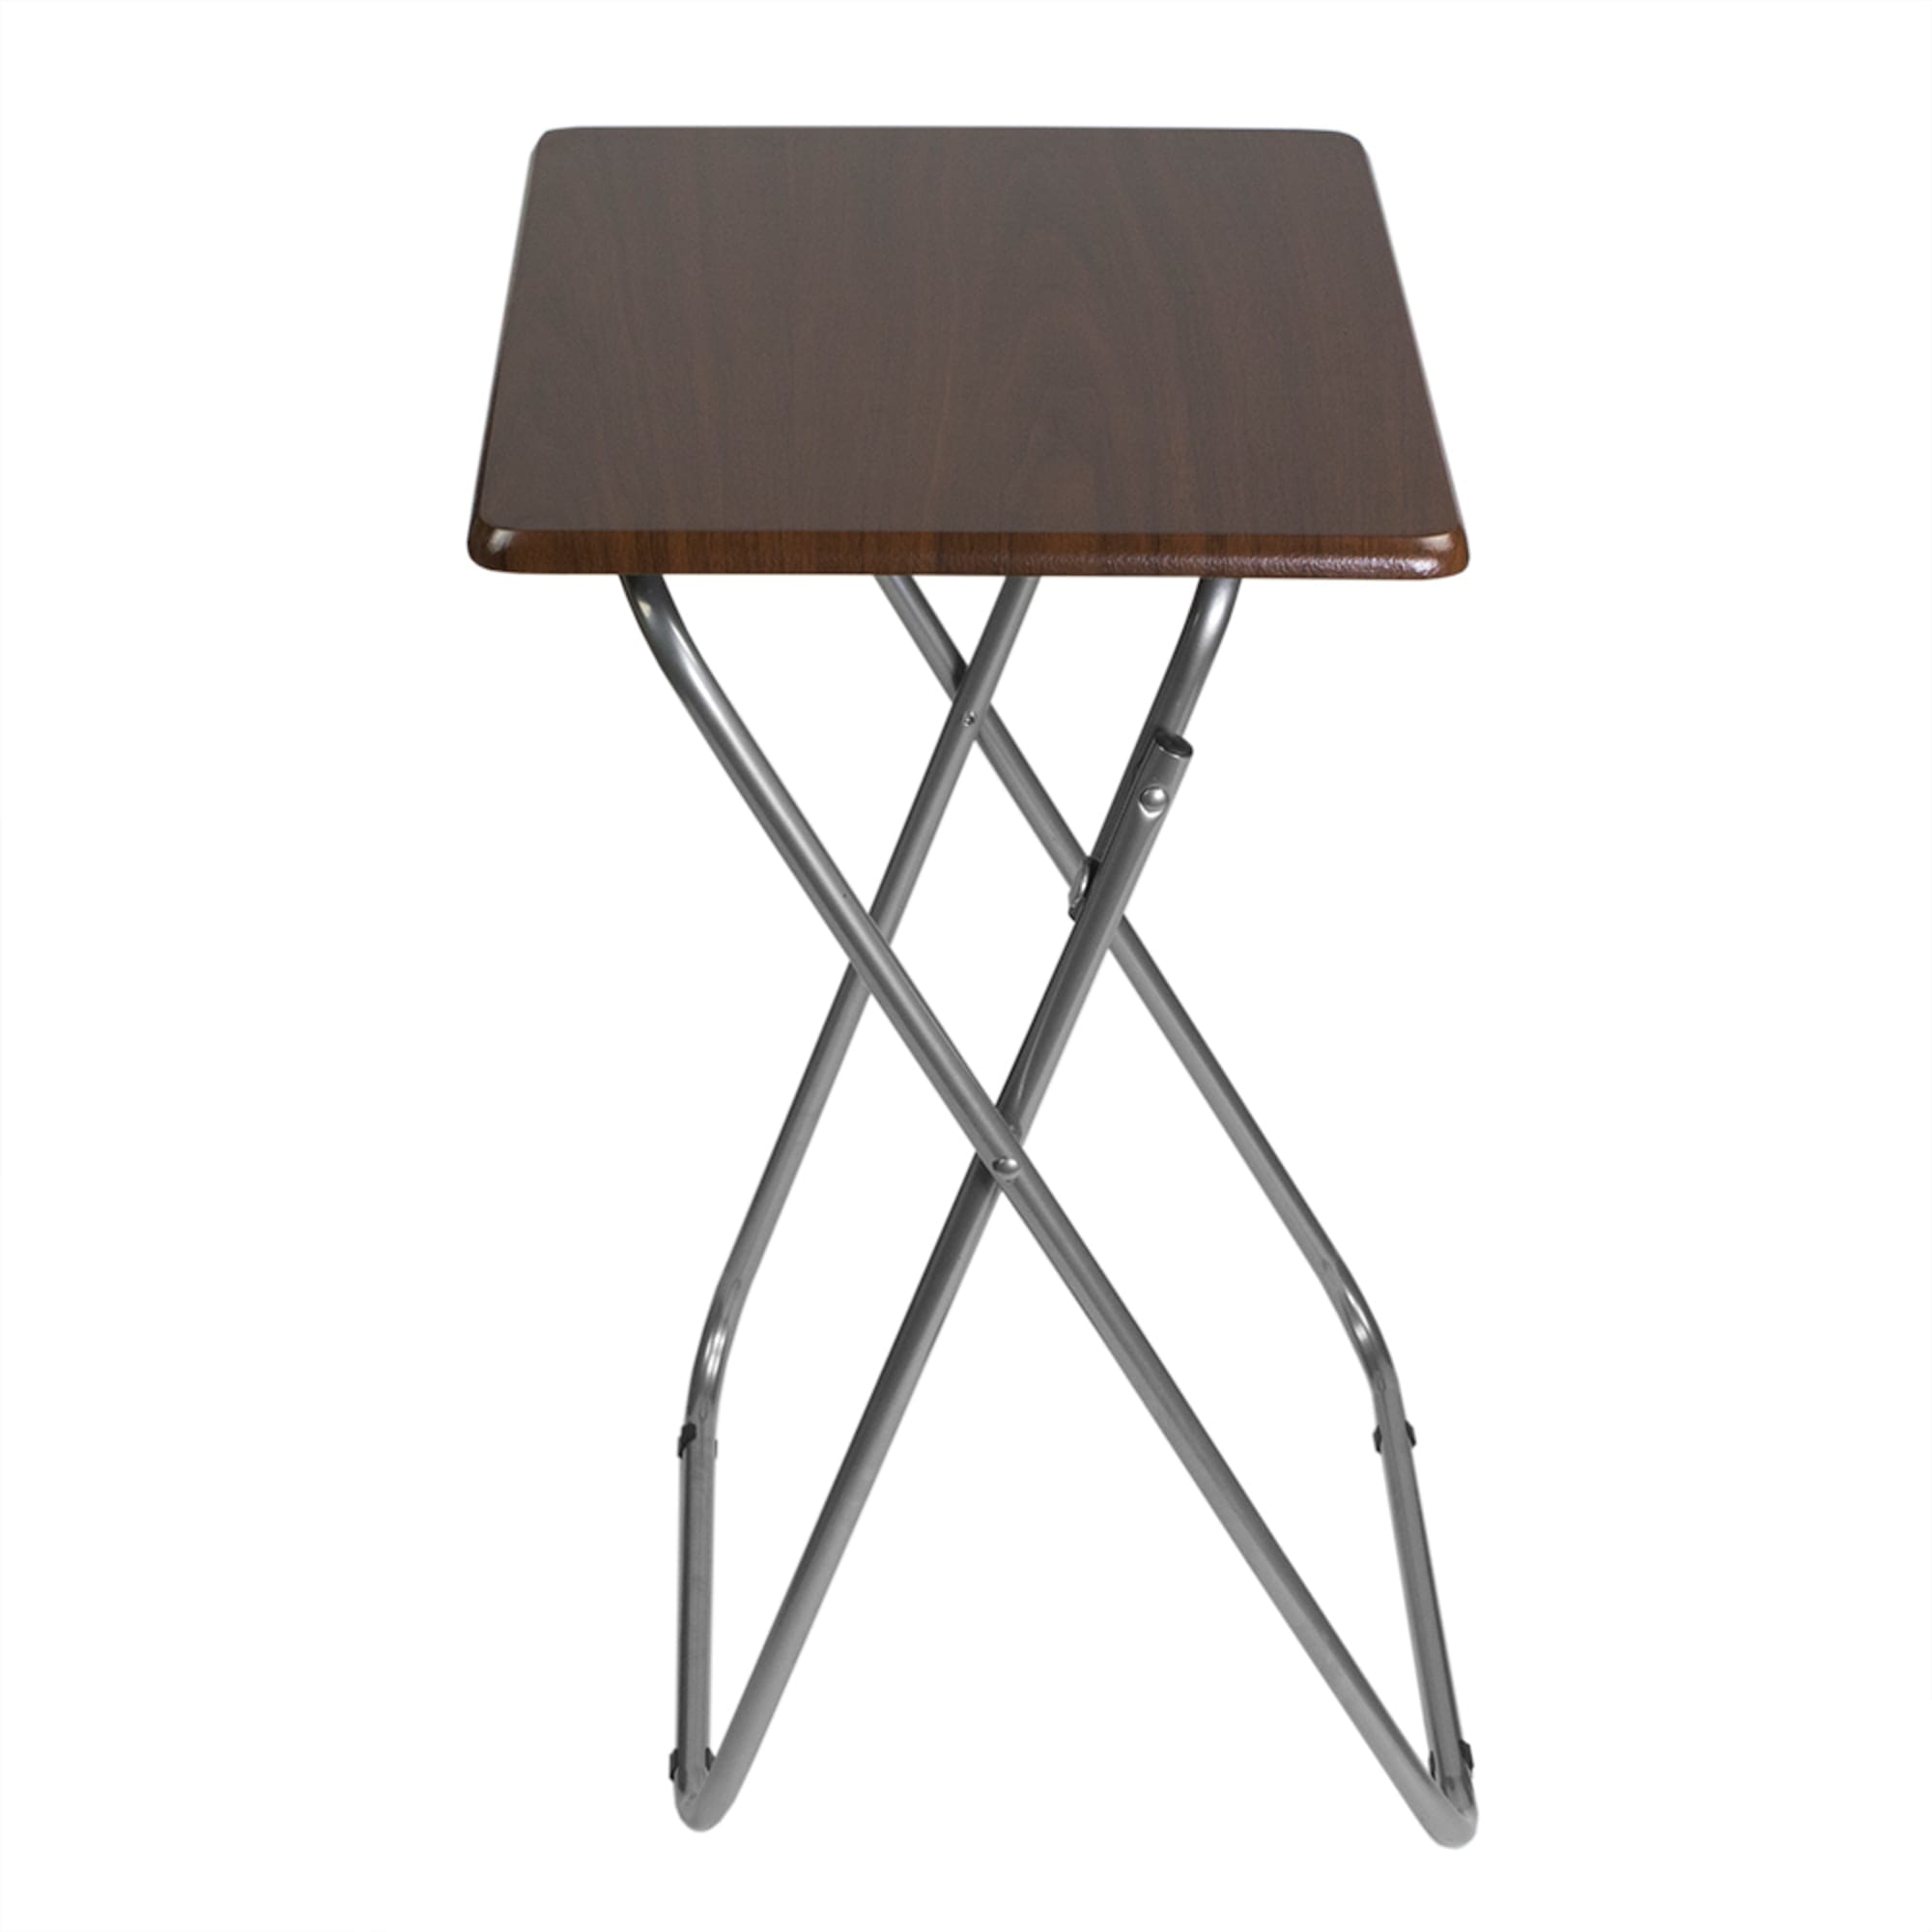 Home Basics Multi-Purpose Foldable Table, Cherry $15.00 EACH, CASE PACK OF 6